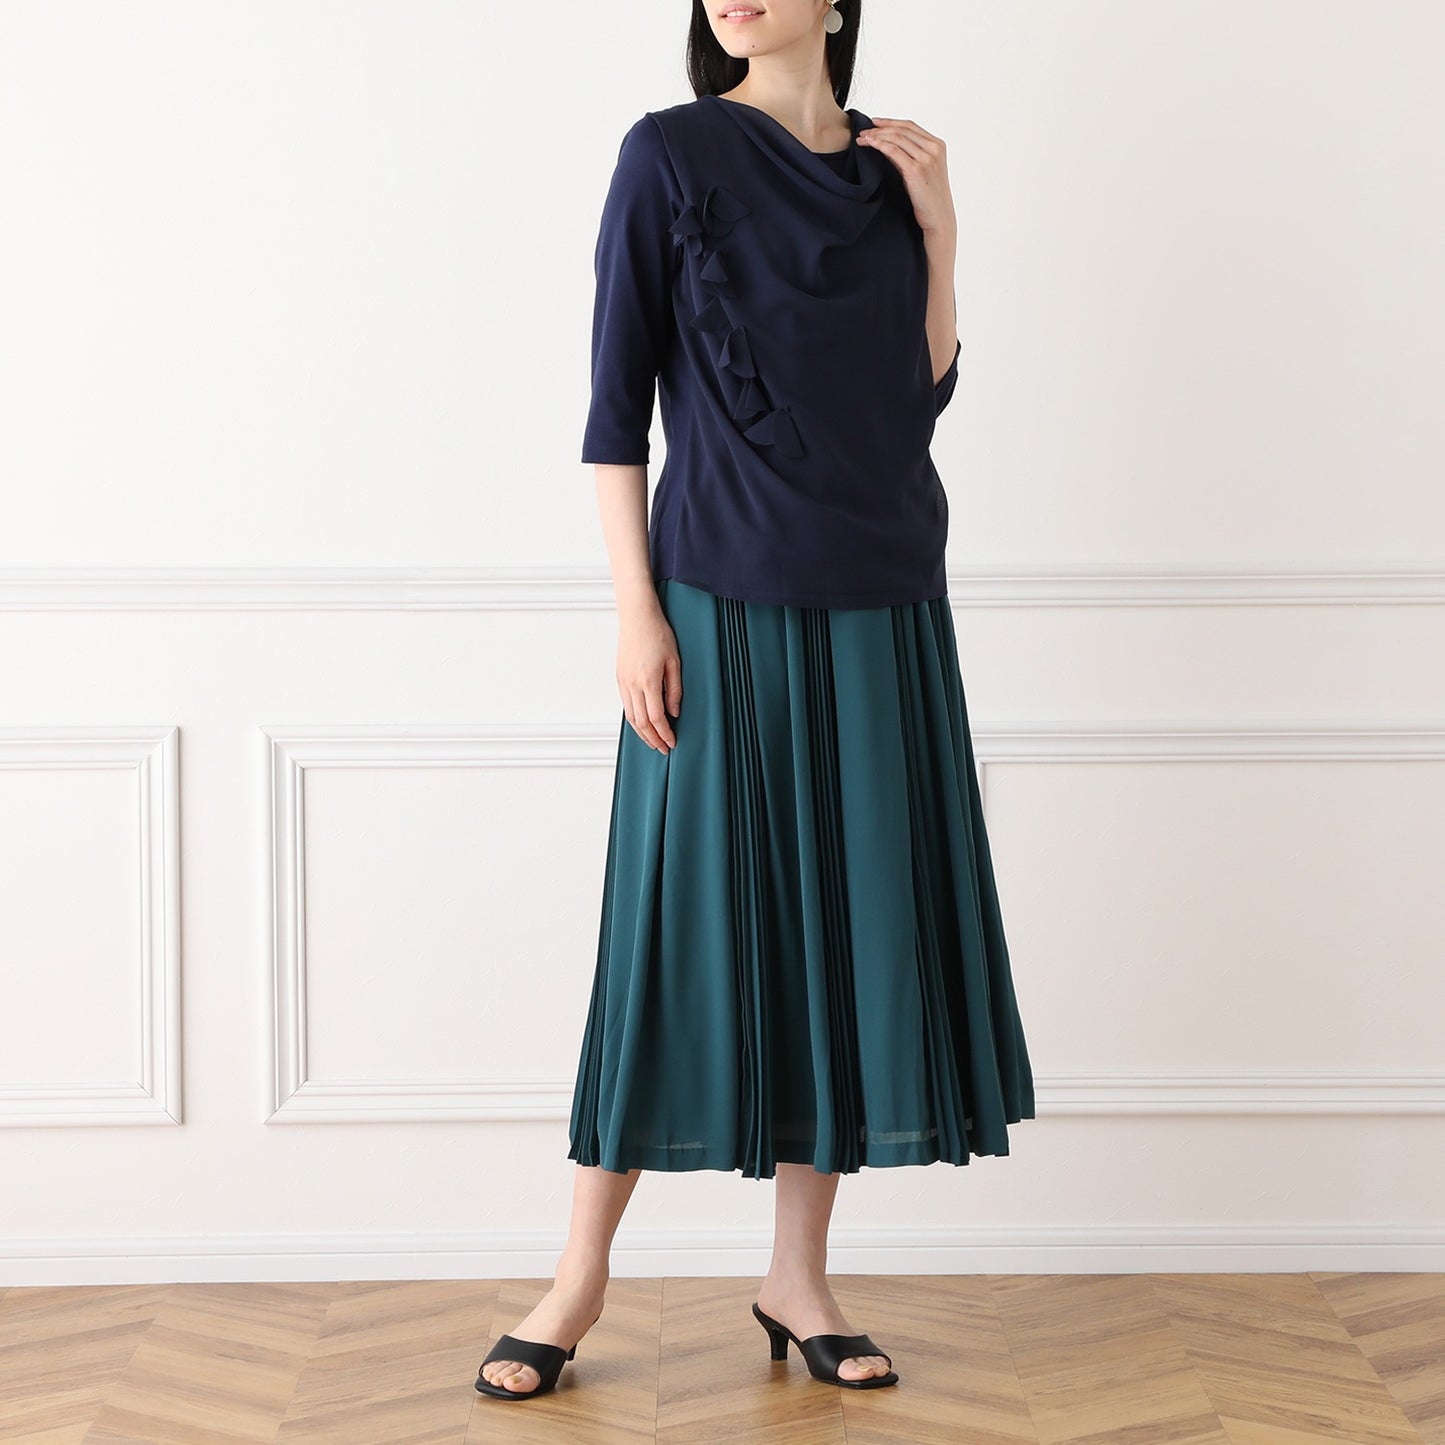 Pleated Paneled Skirt in Emerald Georgette